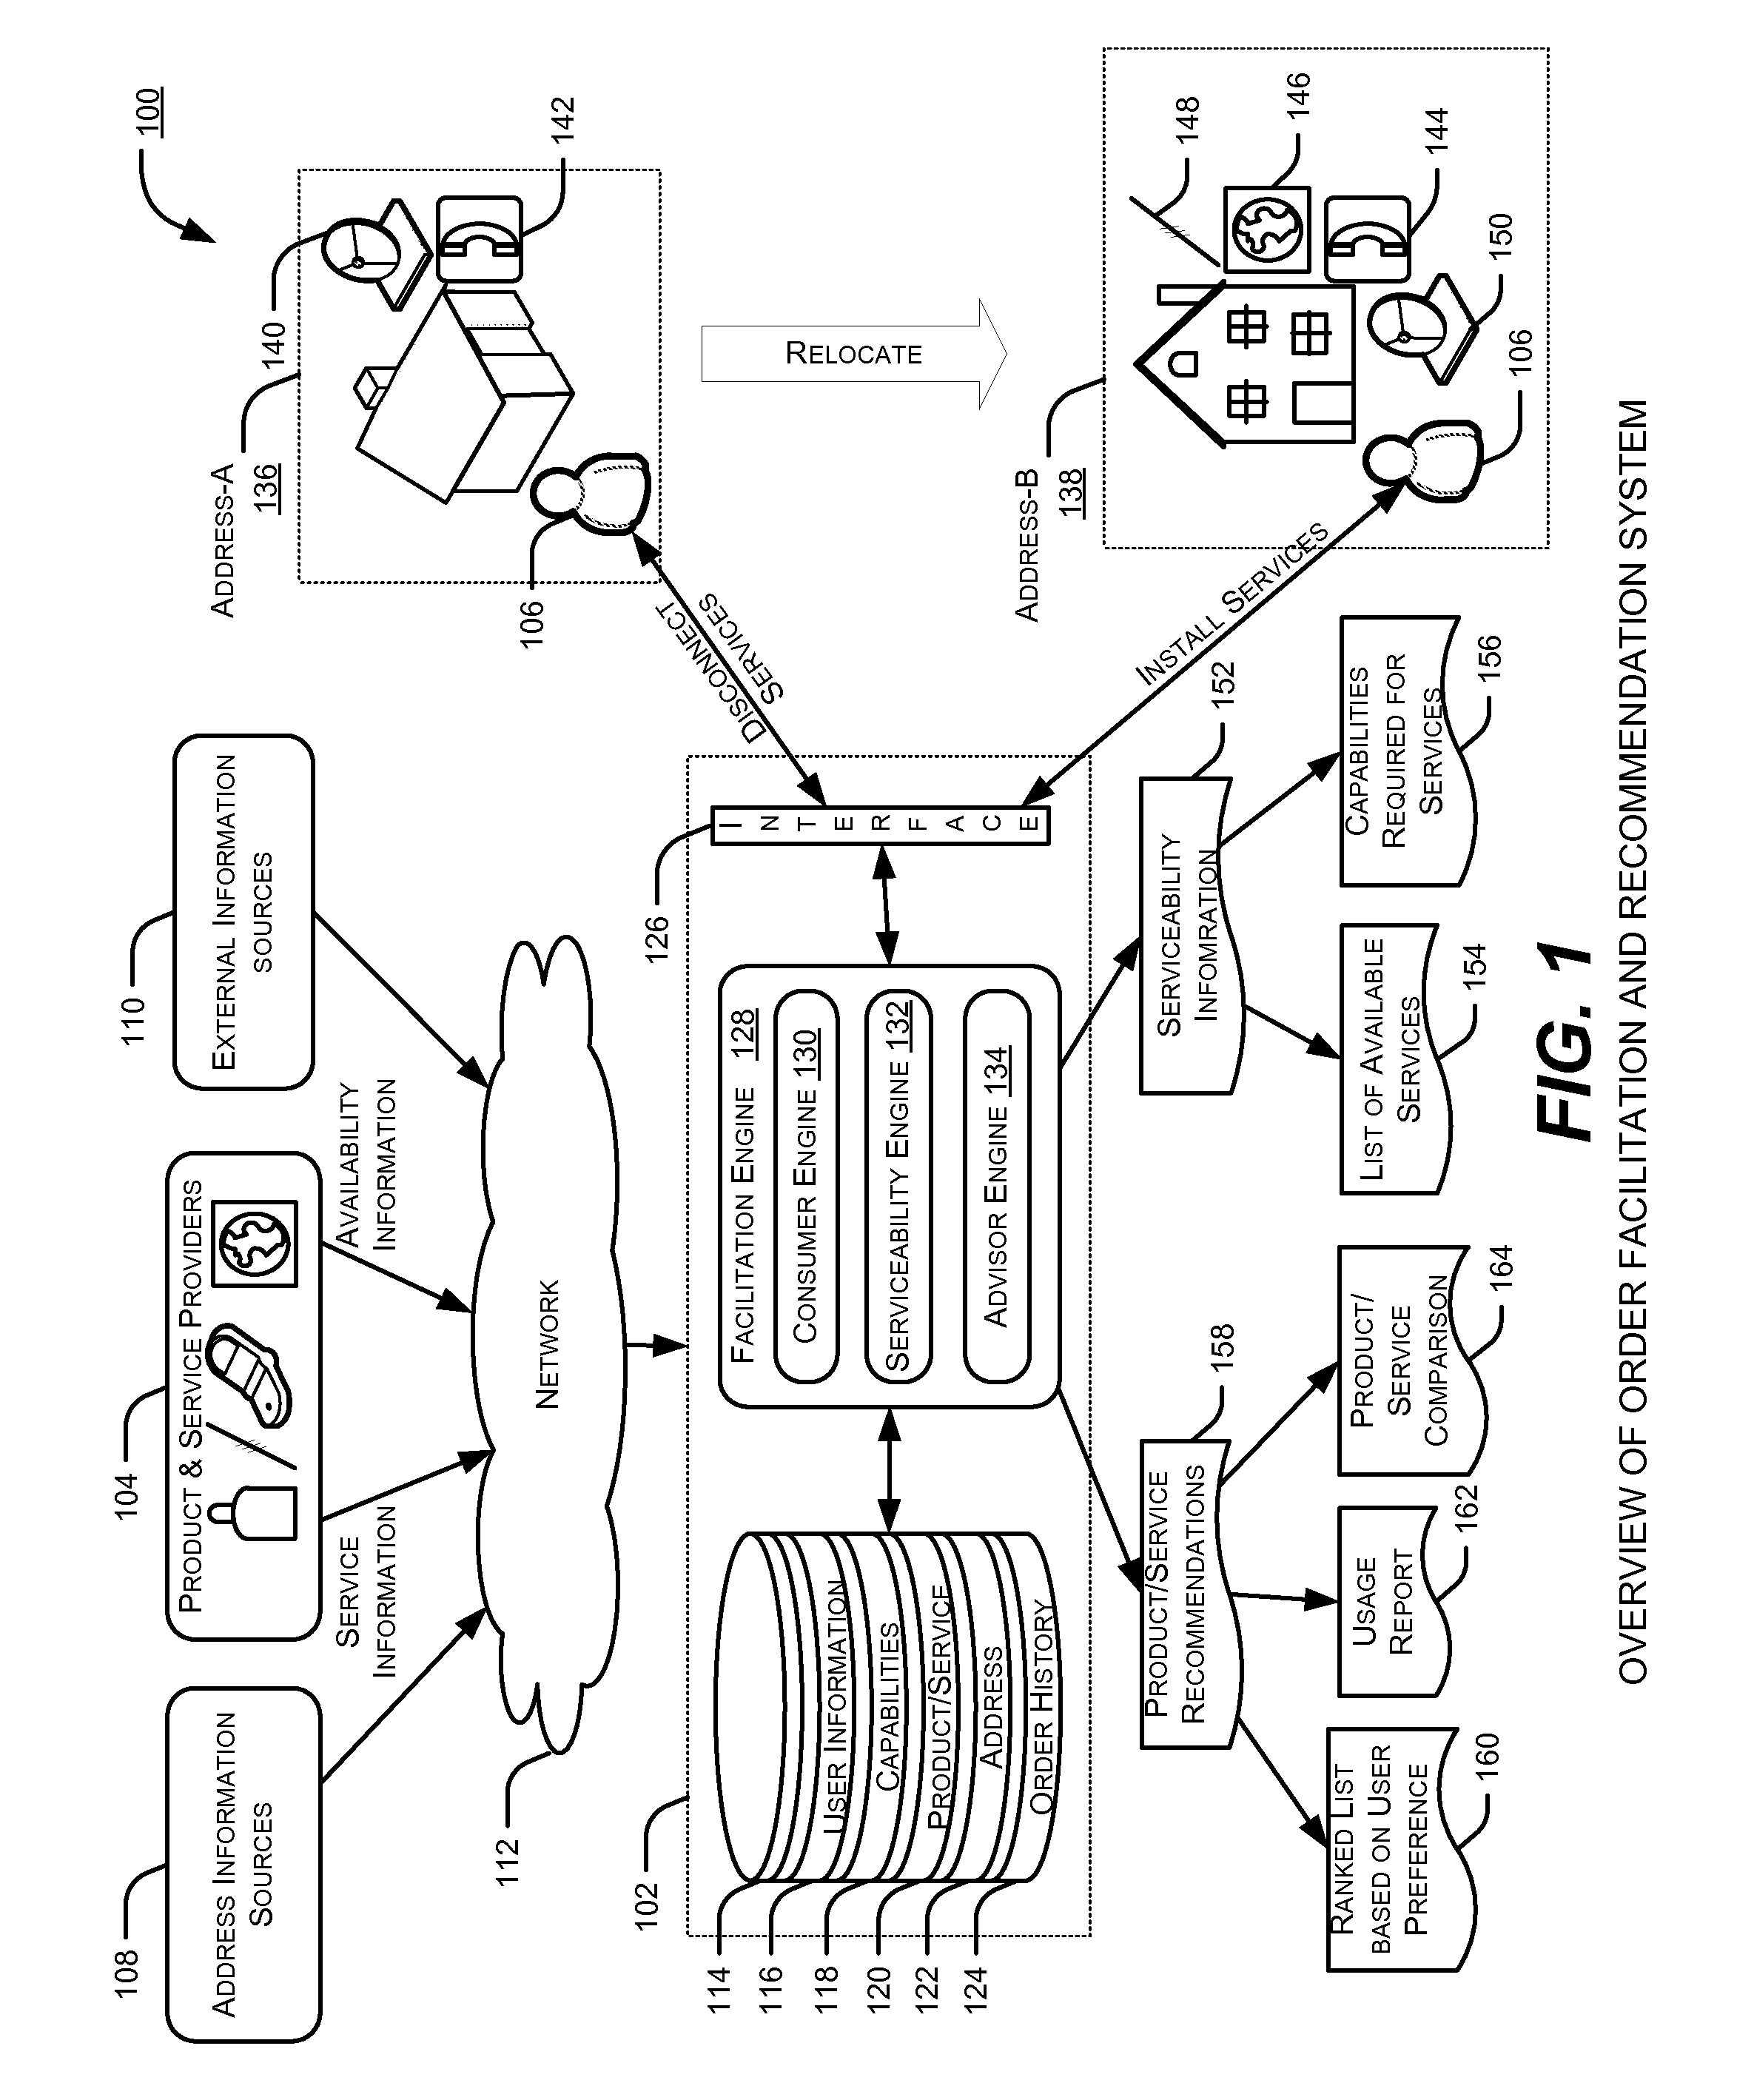 Systems and methods for managing and/or recommending third party products and services provided to a user